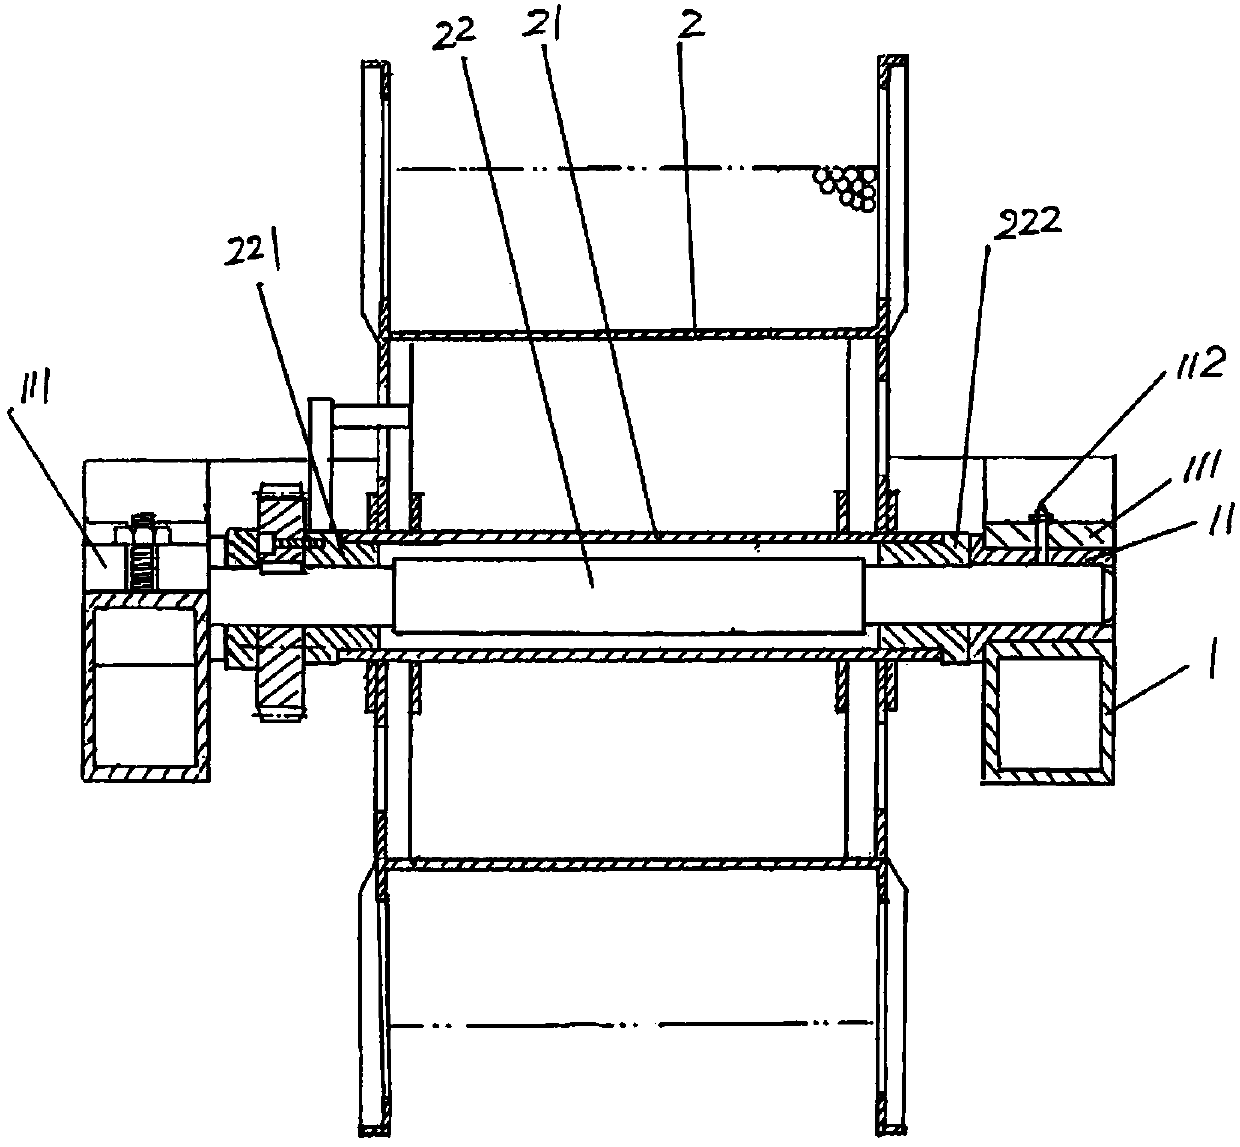 Cradle and pay-off reel structure of cable-former stranding cage device